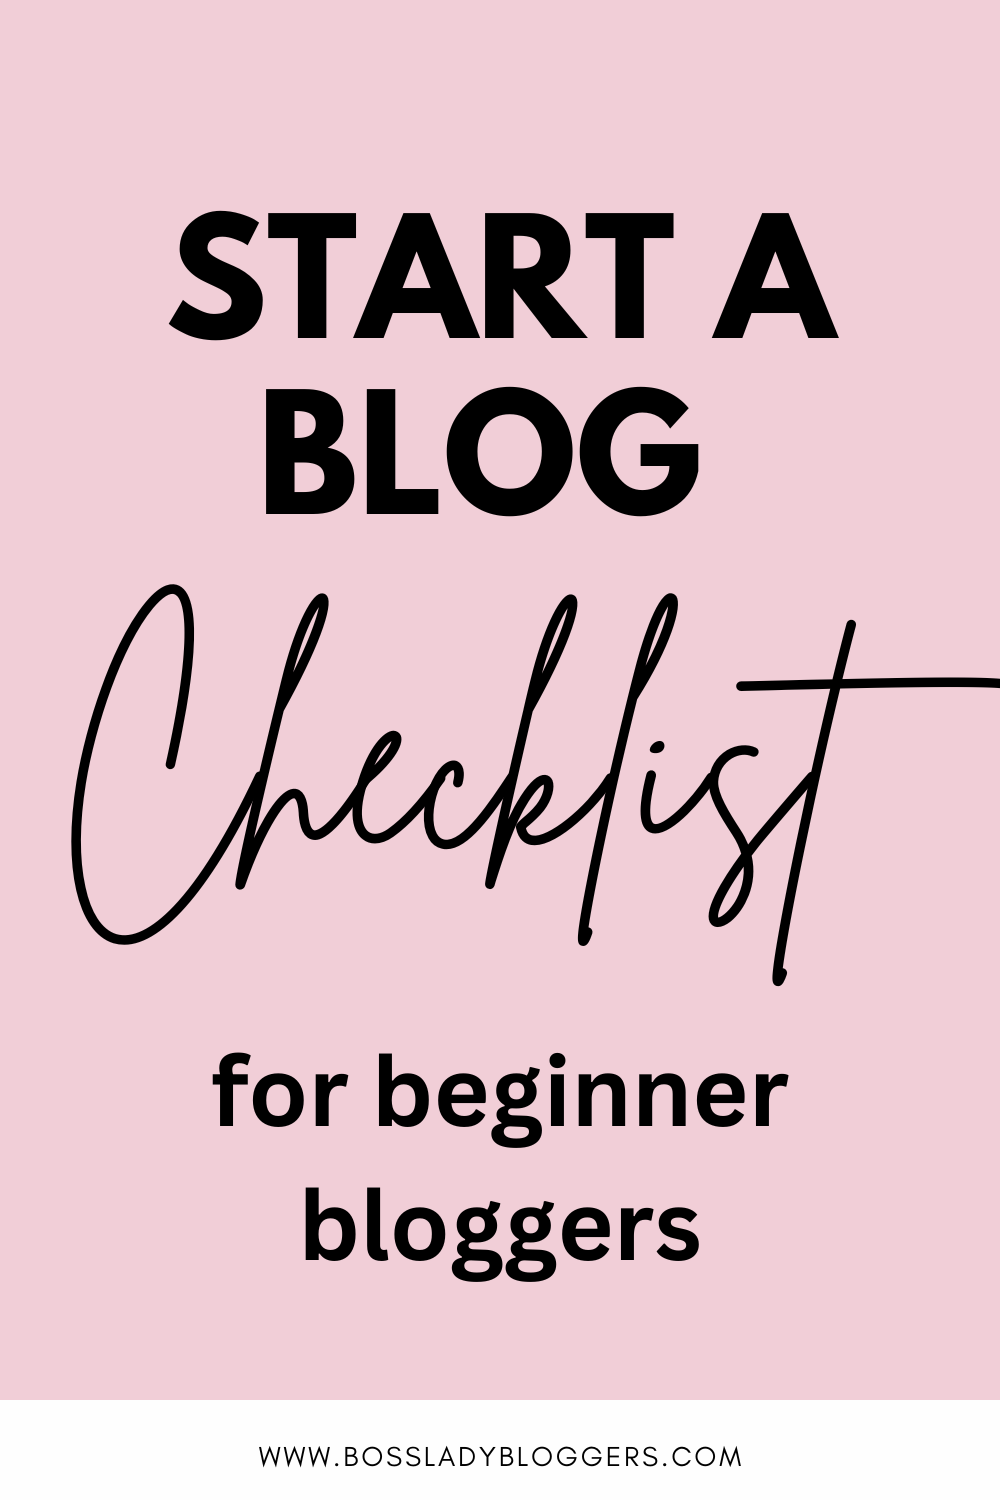 starting a blog checklist pinterest pin image that is pink with black text